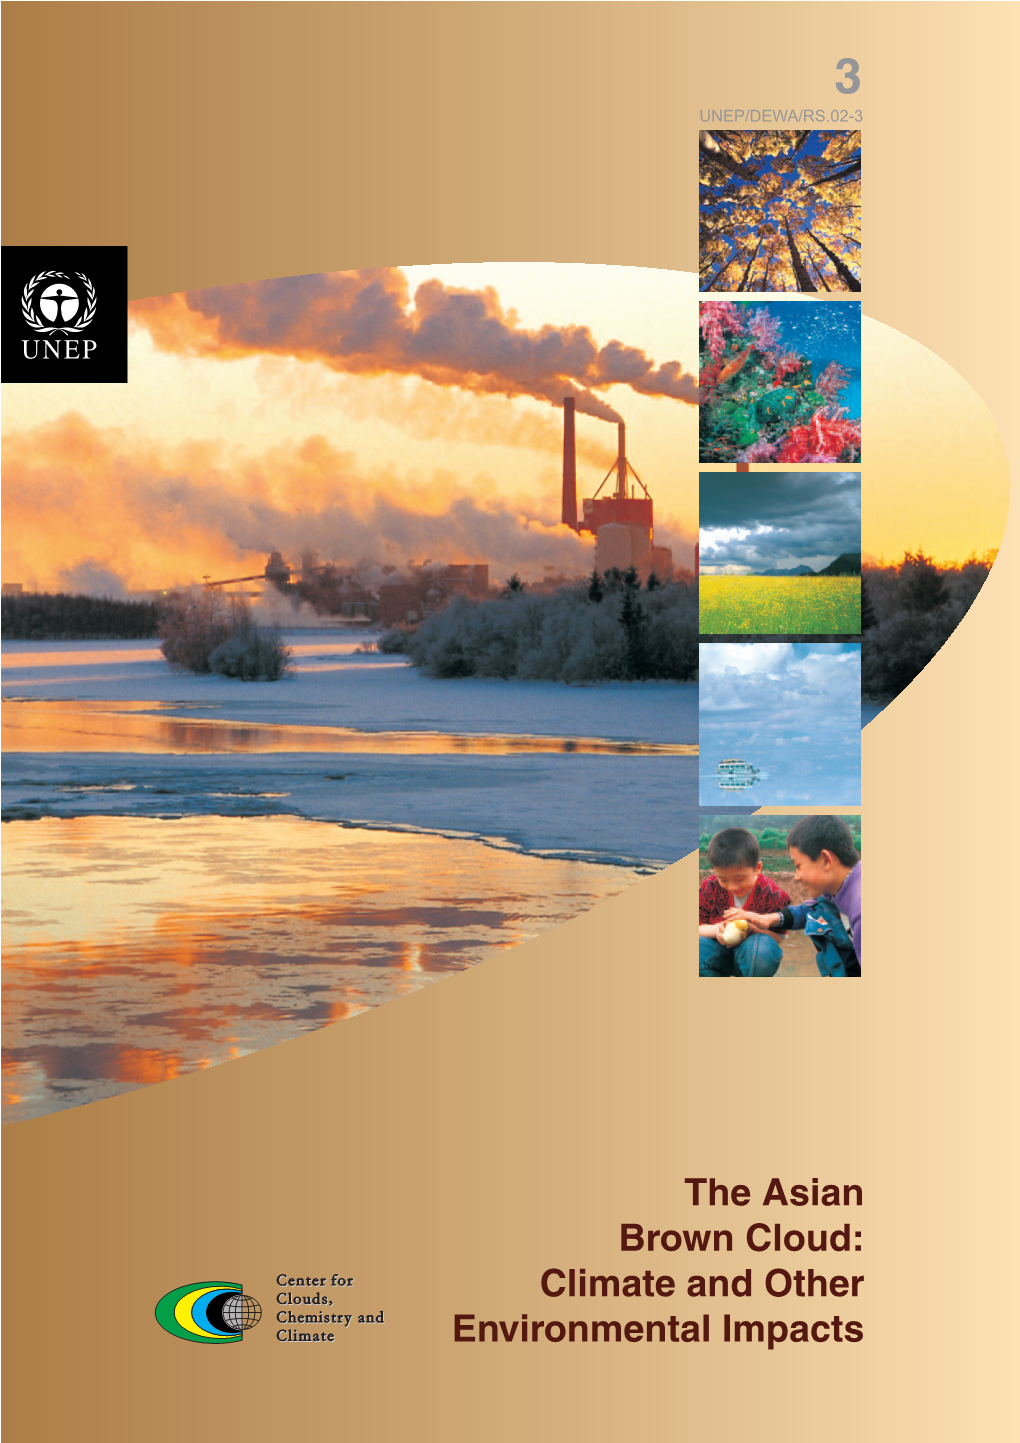 The Asian Brown Cloud: Climate and Other Environmental Impacts UNEP, Nairobi